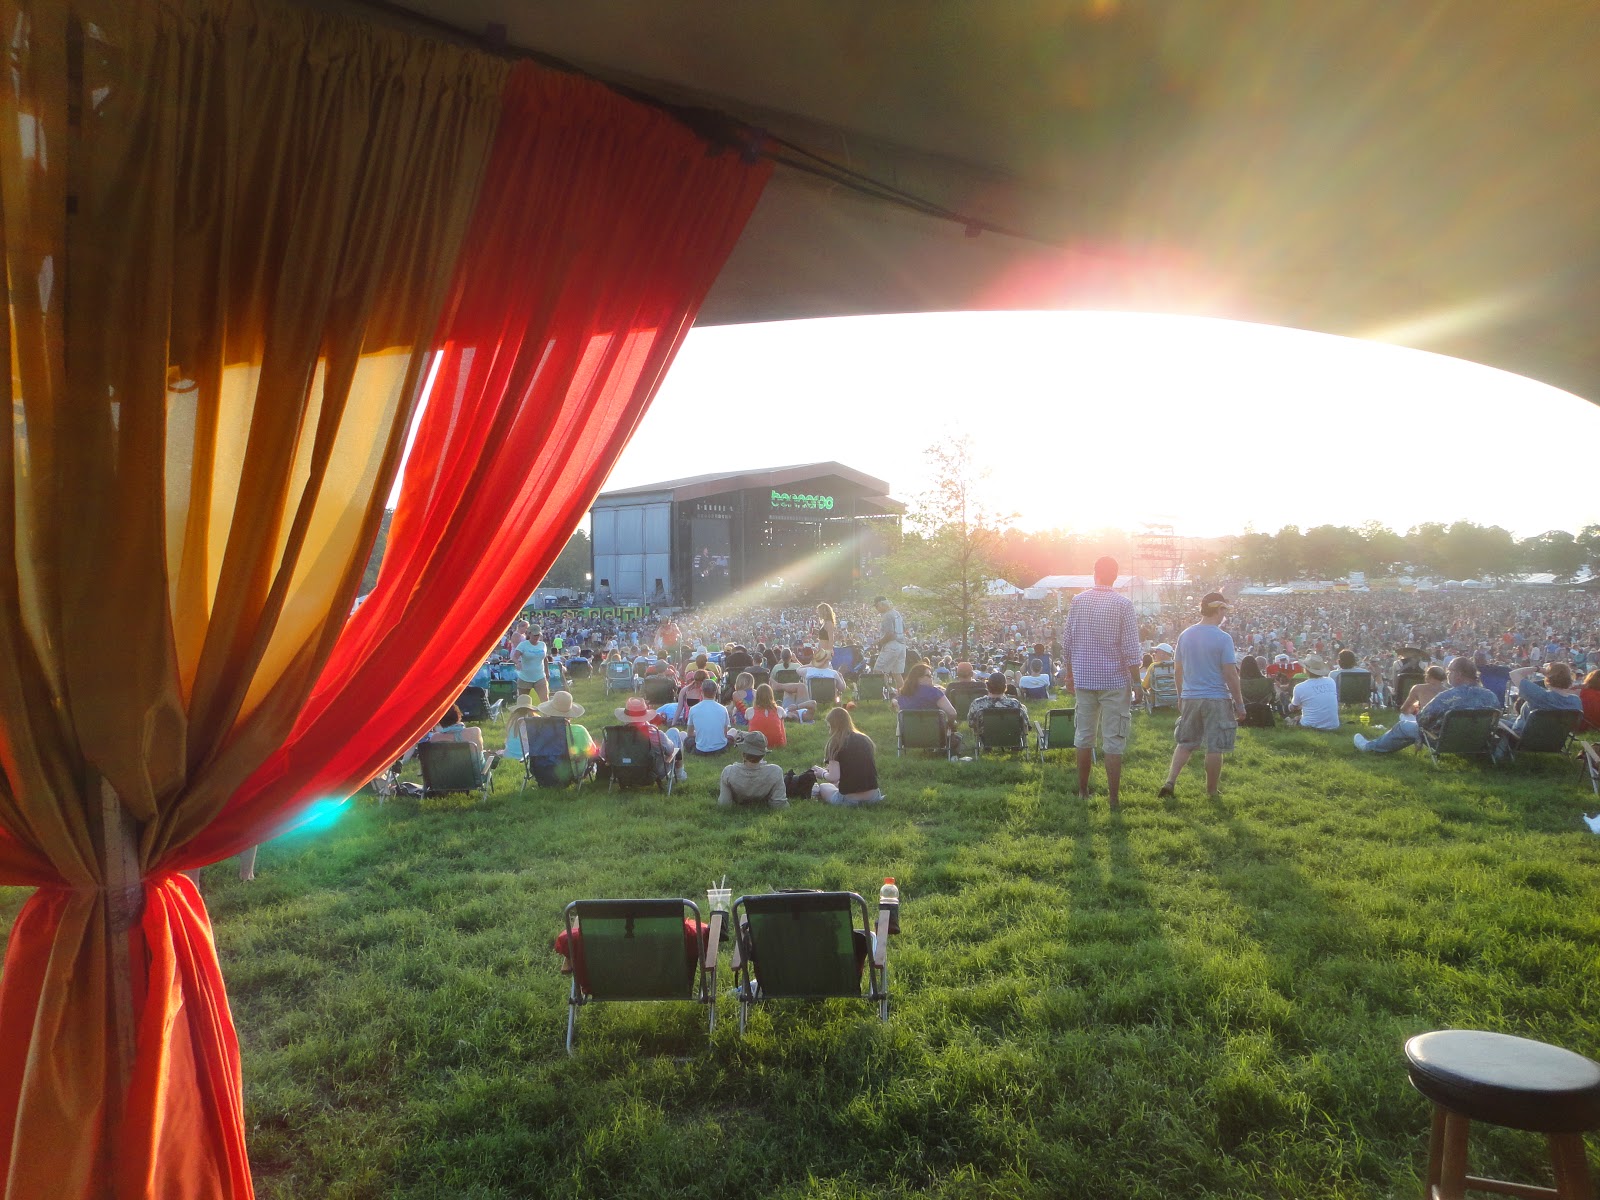 View from VIP Hill, Bonnaroo 2013